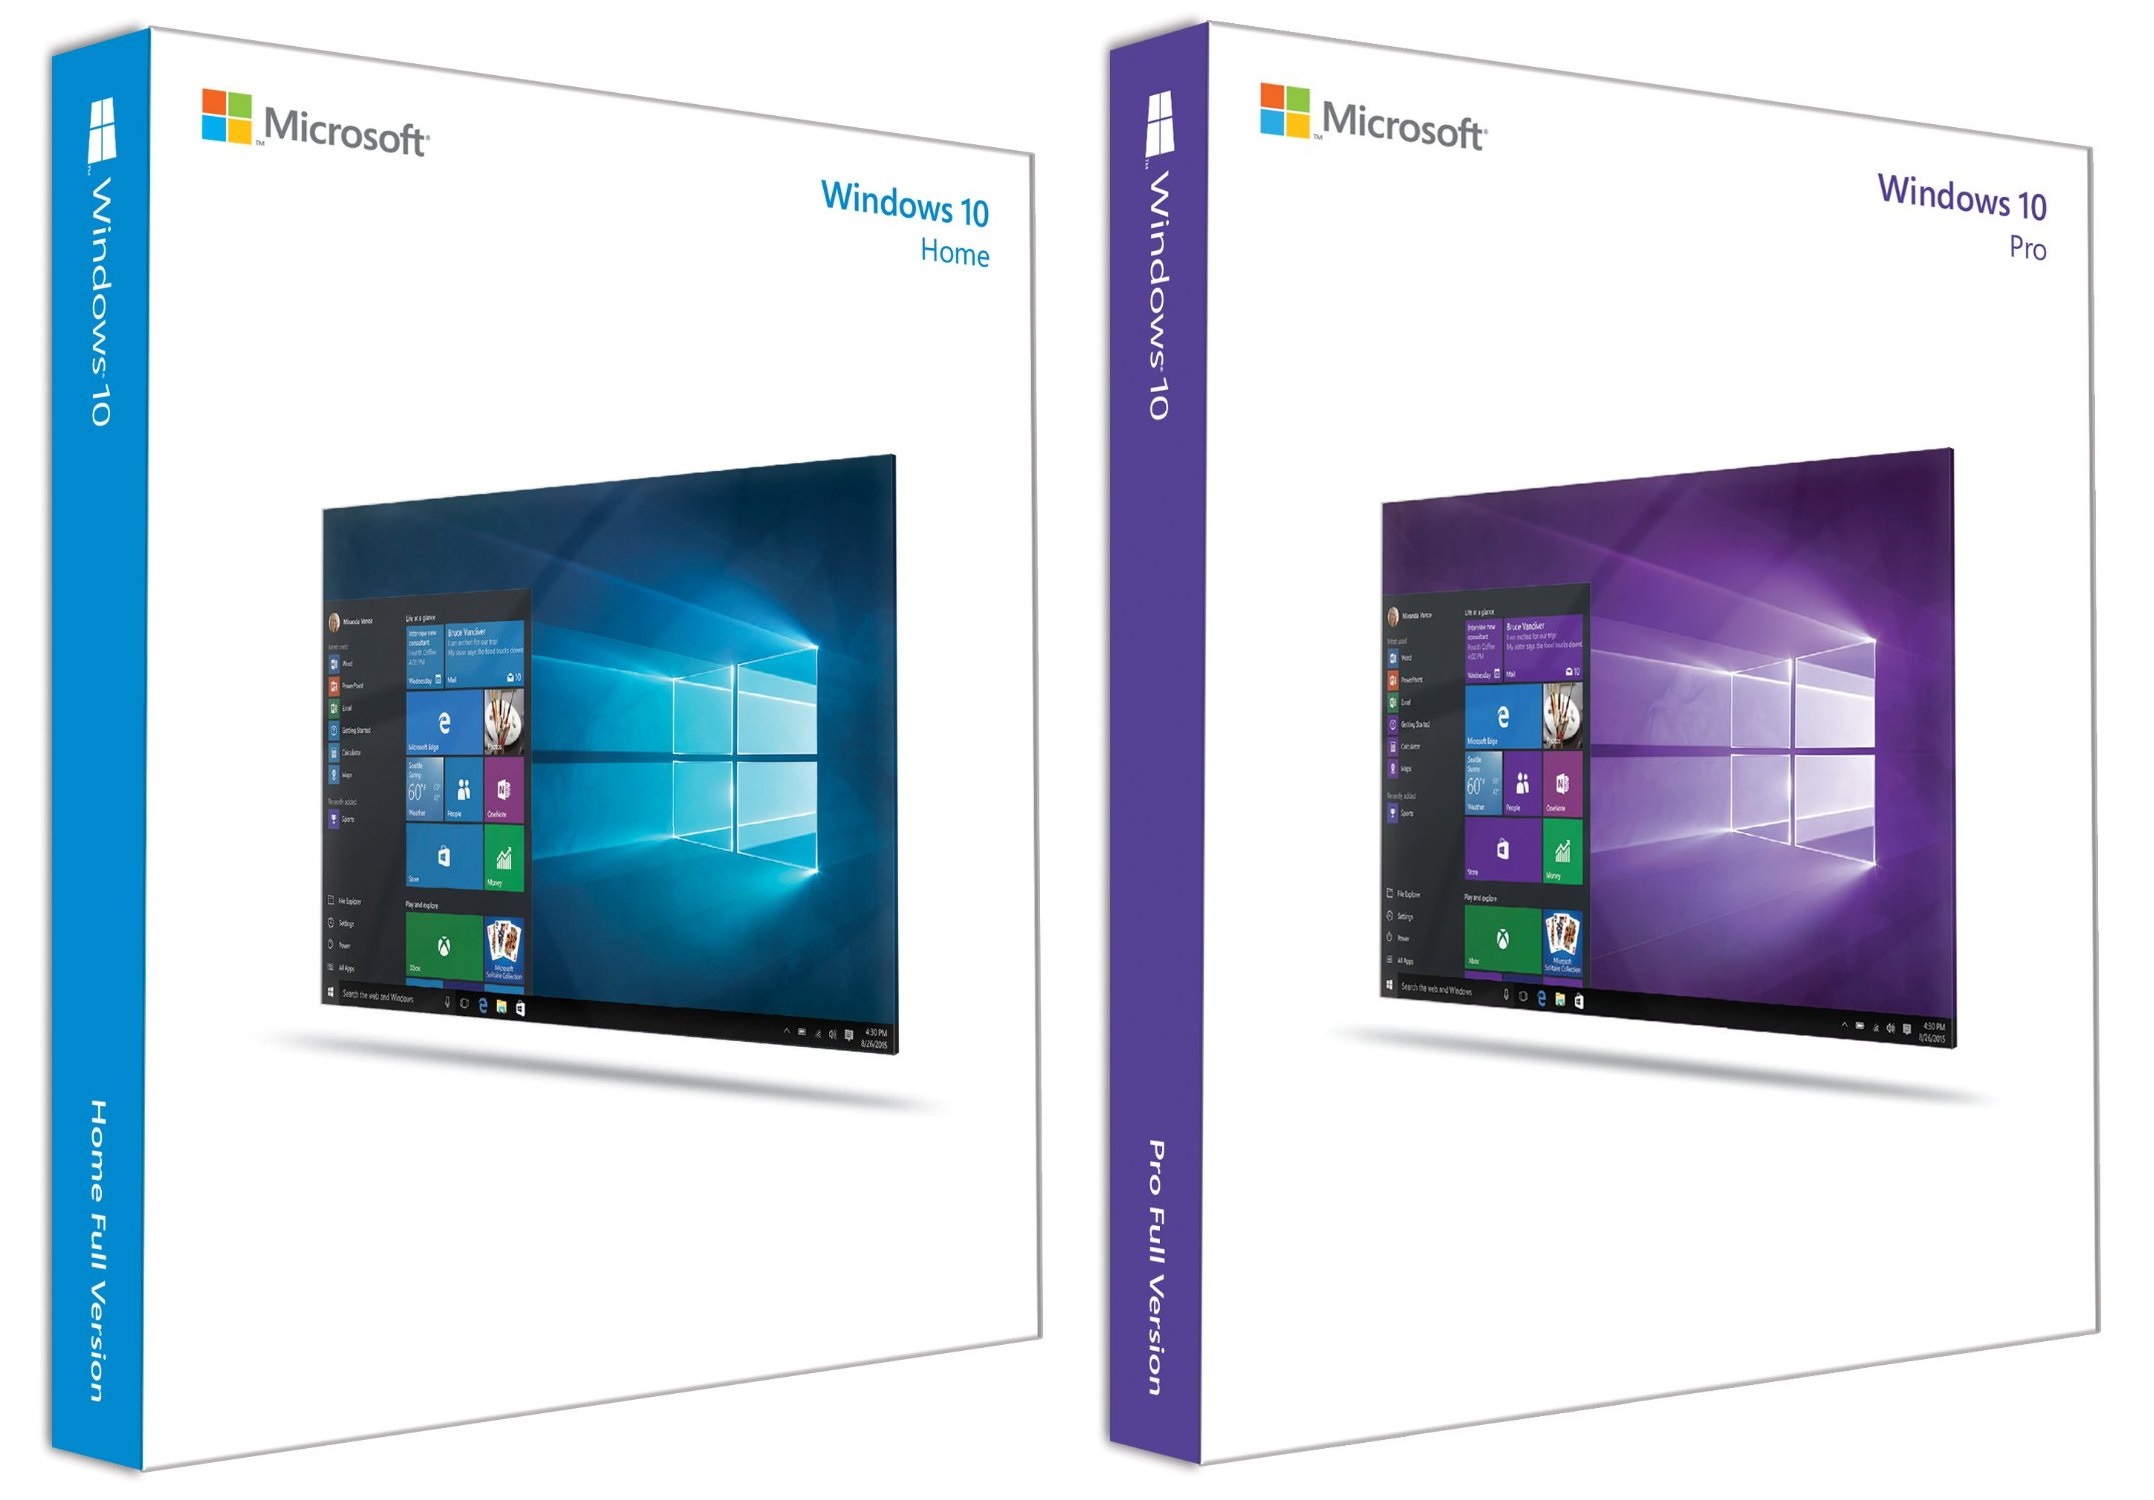 Windows 10 Editions The Windows 10 Review The Old And New Face Of Windows